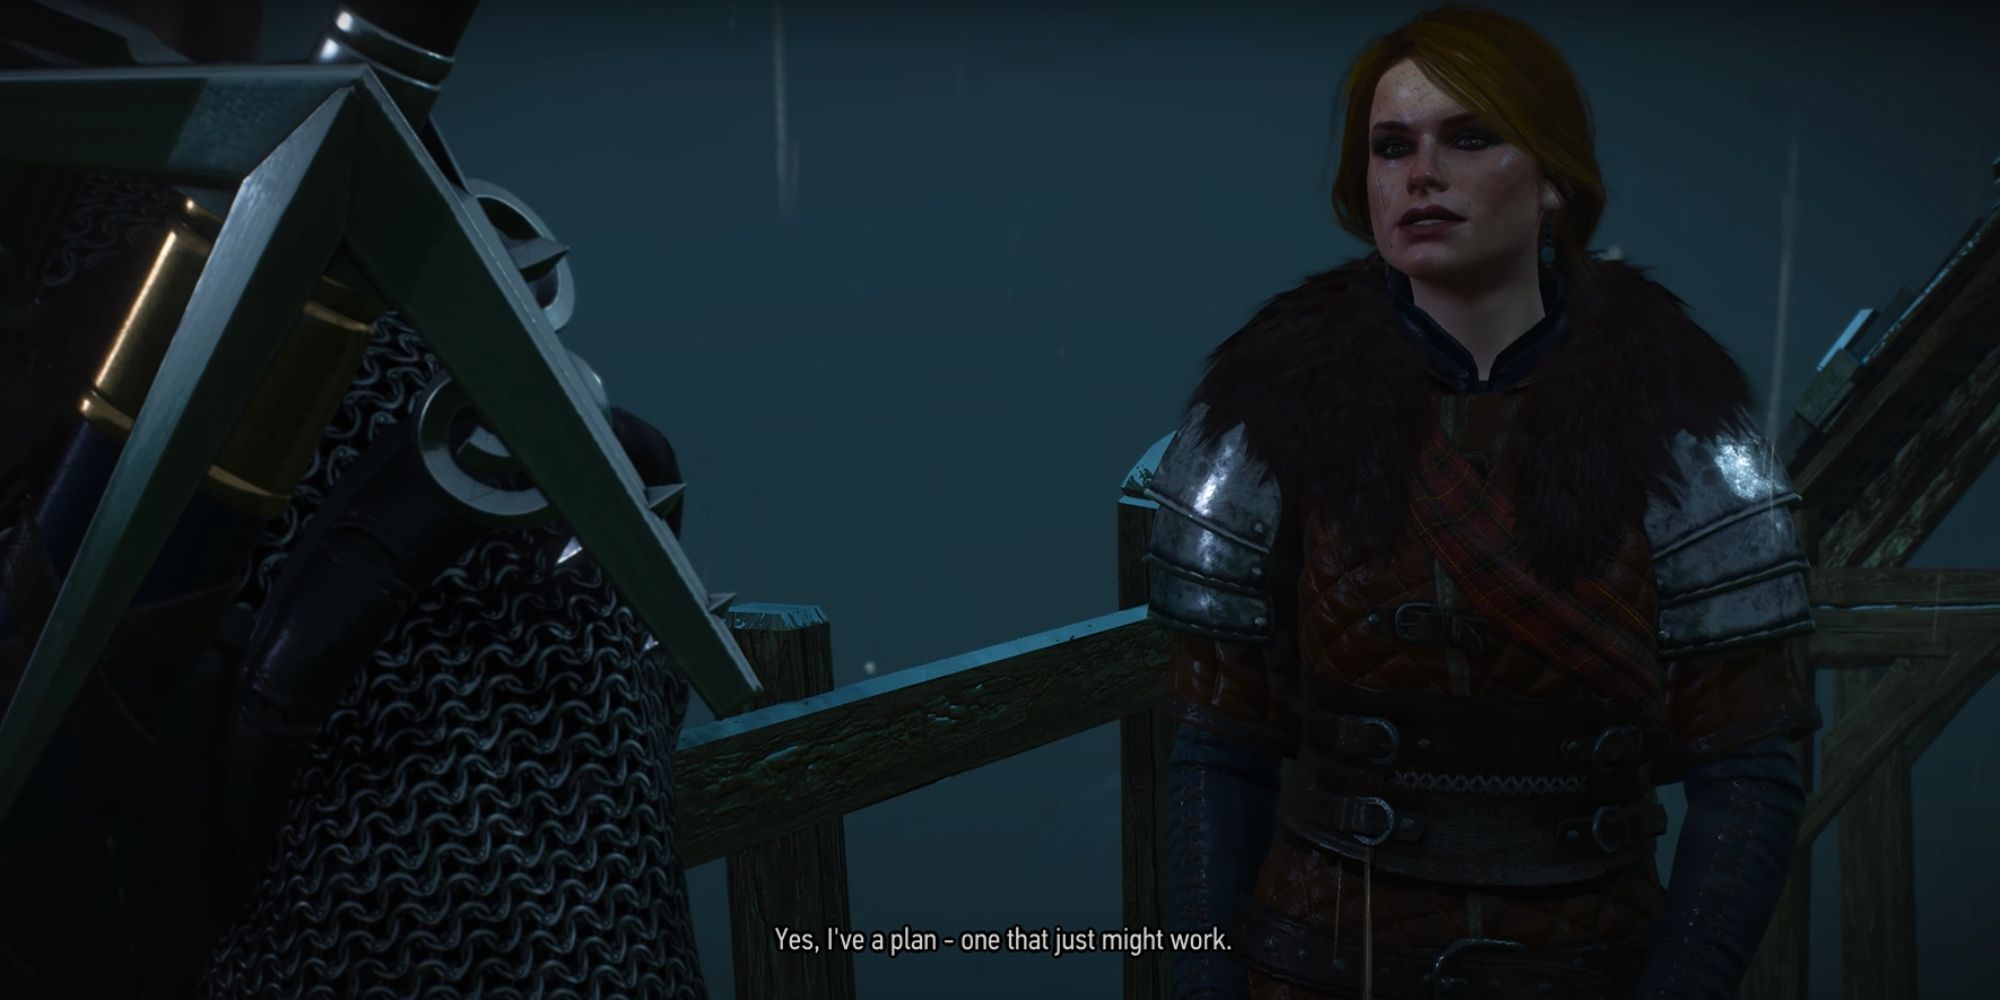 The Witcher 3 Screenshot Of Cerys has a plan